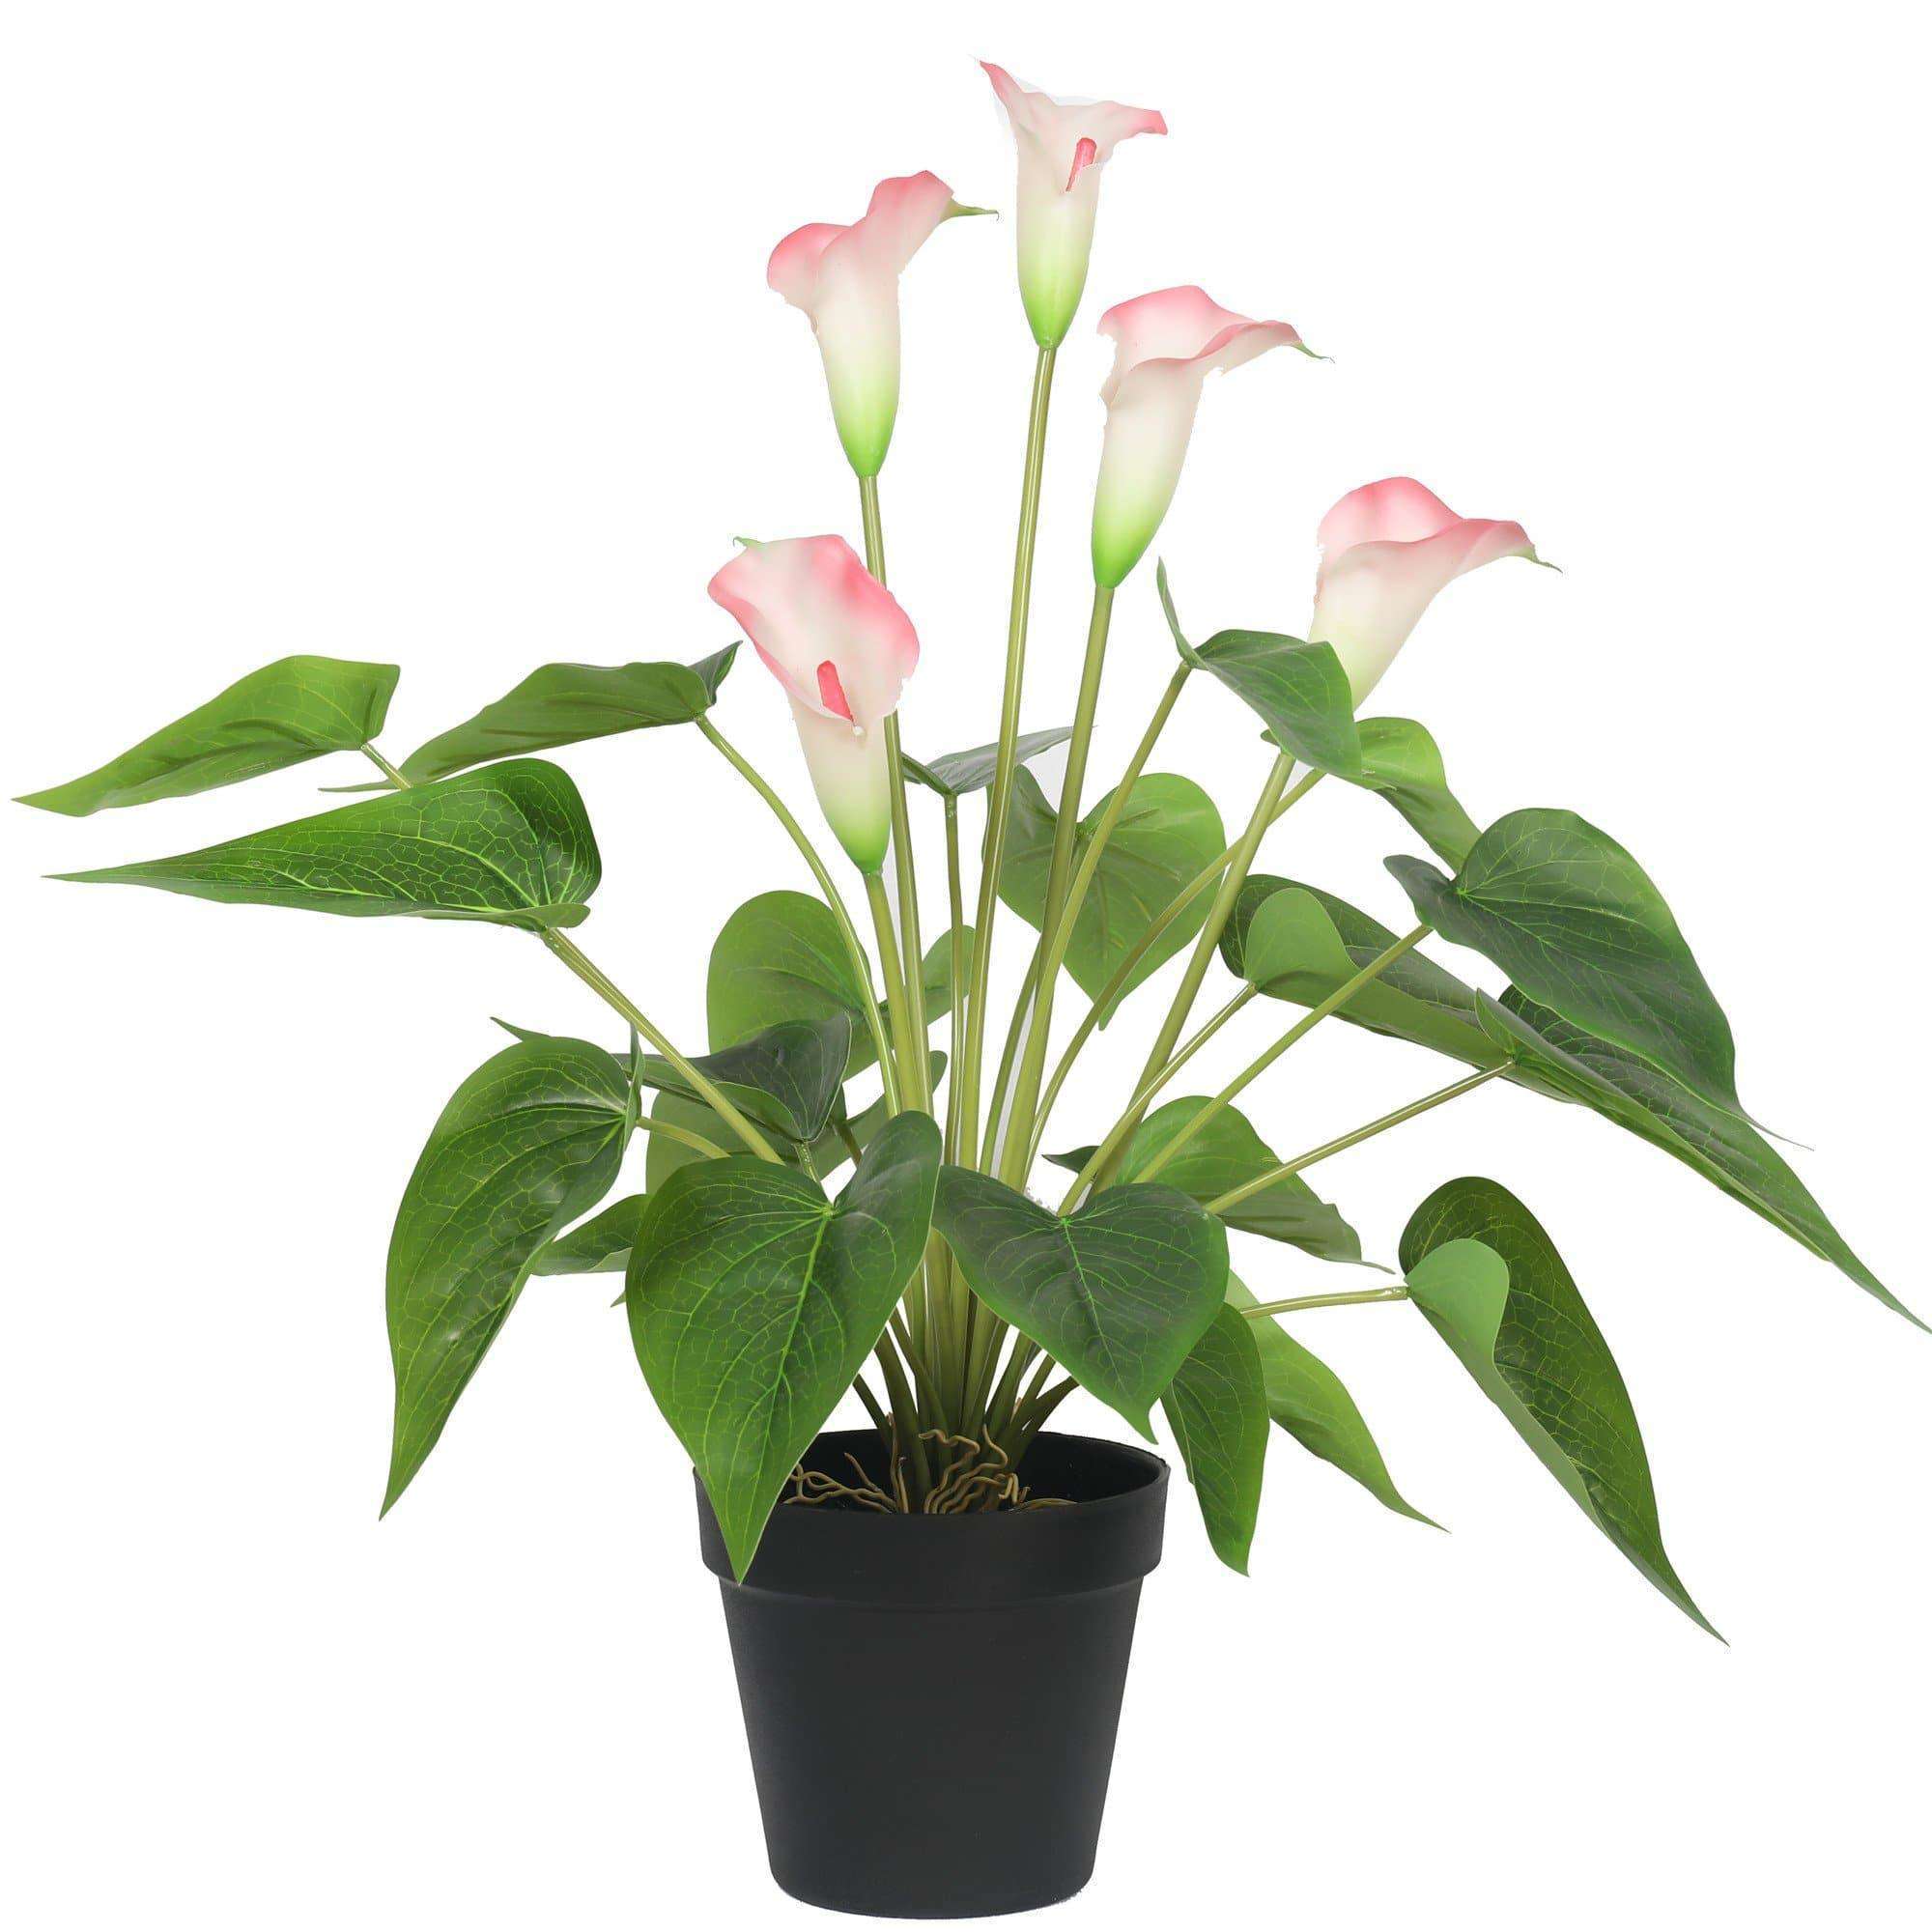 Artificial Flowering White & Pink Peace Lily / Calla Lily Plant 50cm - Designer Vertical Gardens artificial vertical garden melbourne artificial vertical garden plants